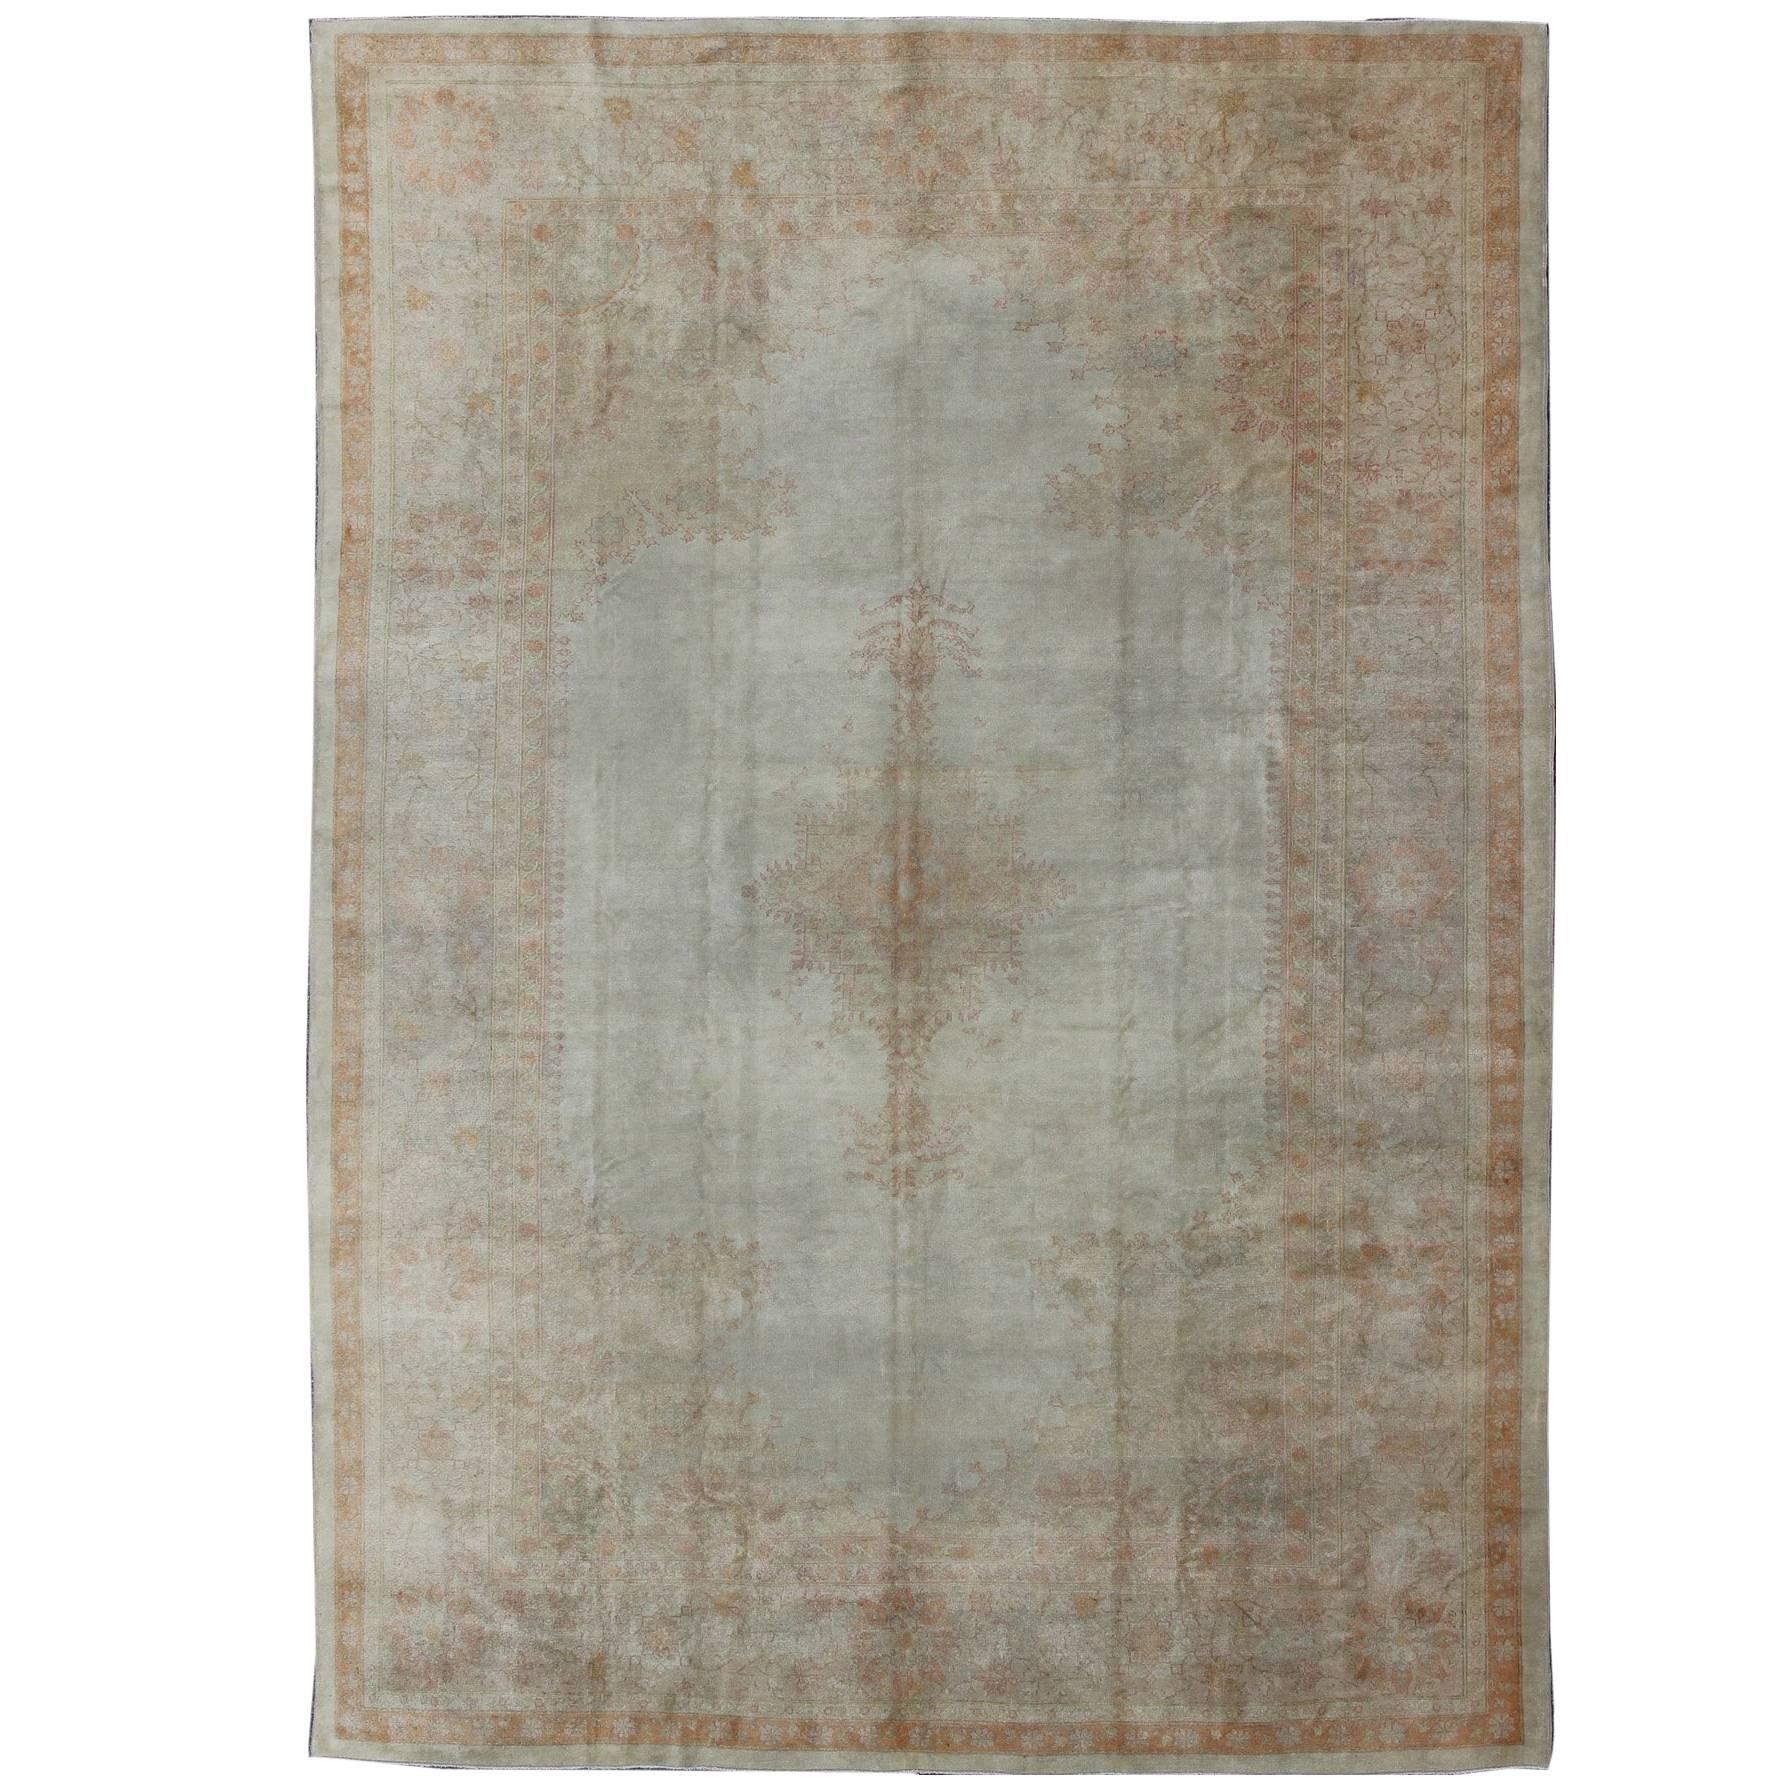 Antique Turkish Burlu Oushak Rug with Fine Weave in Muted Colors For Sale